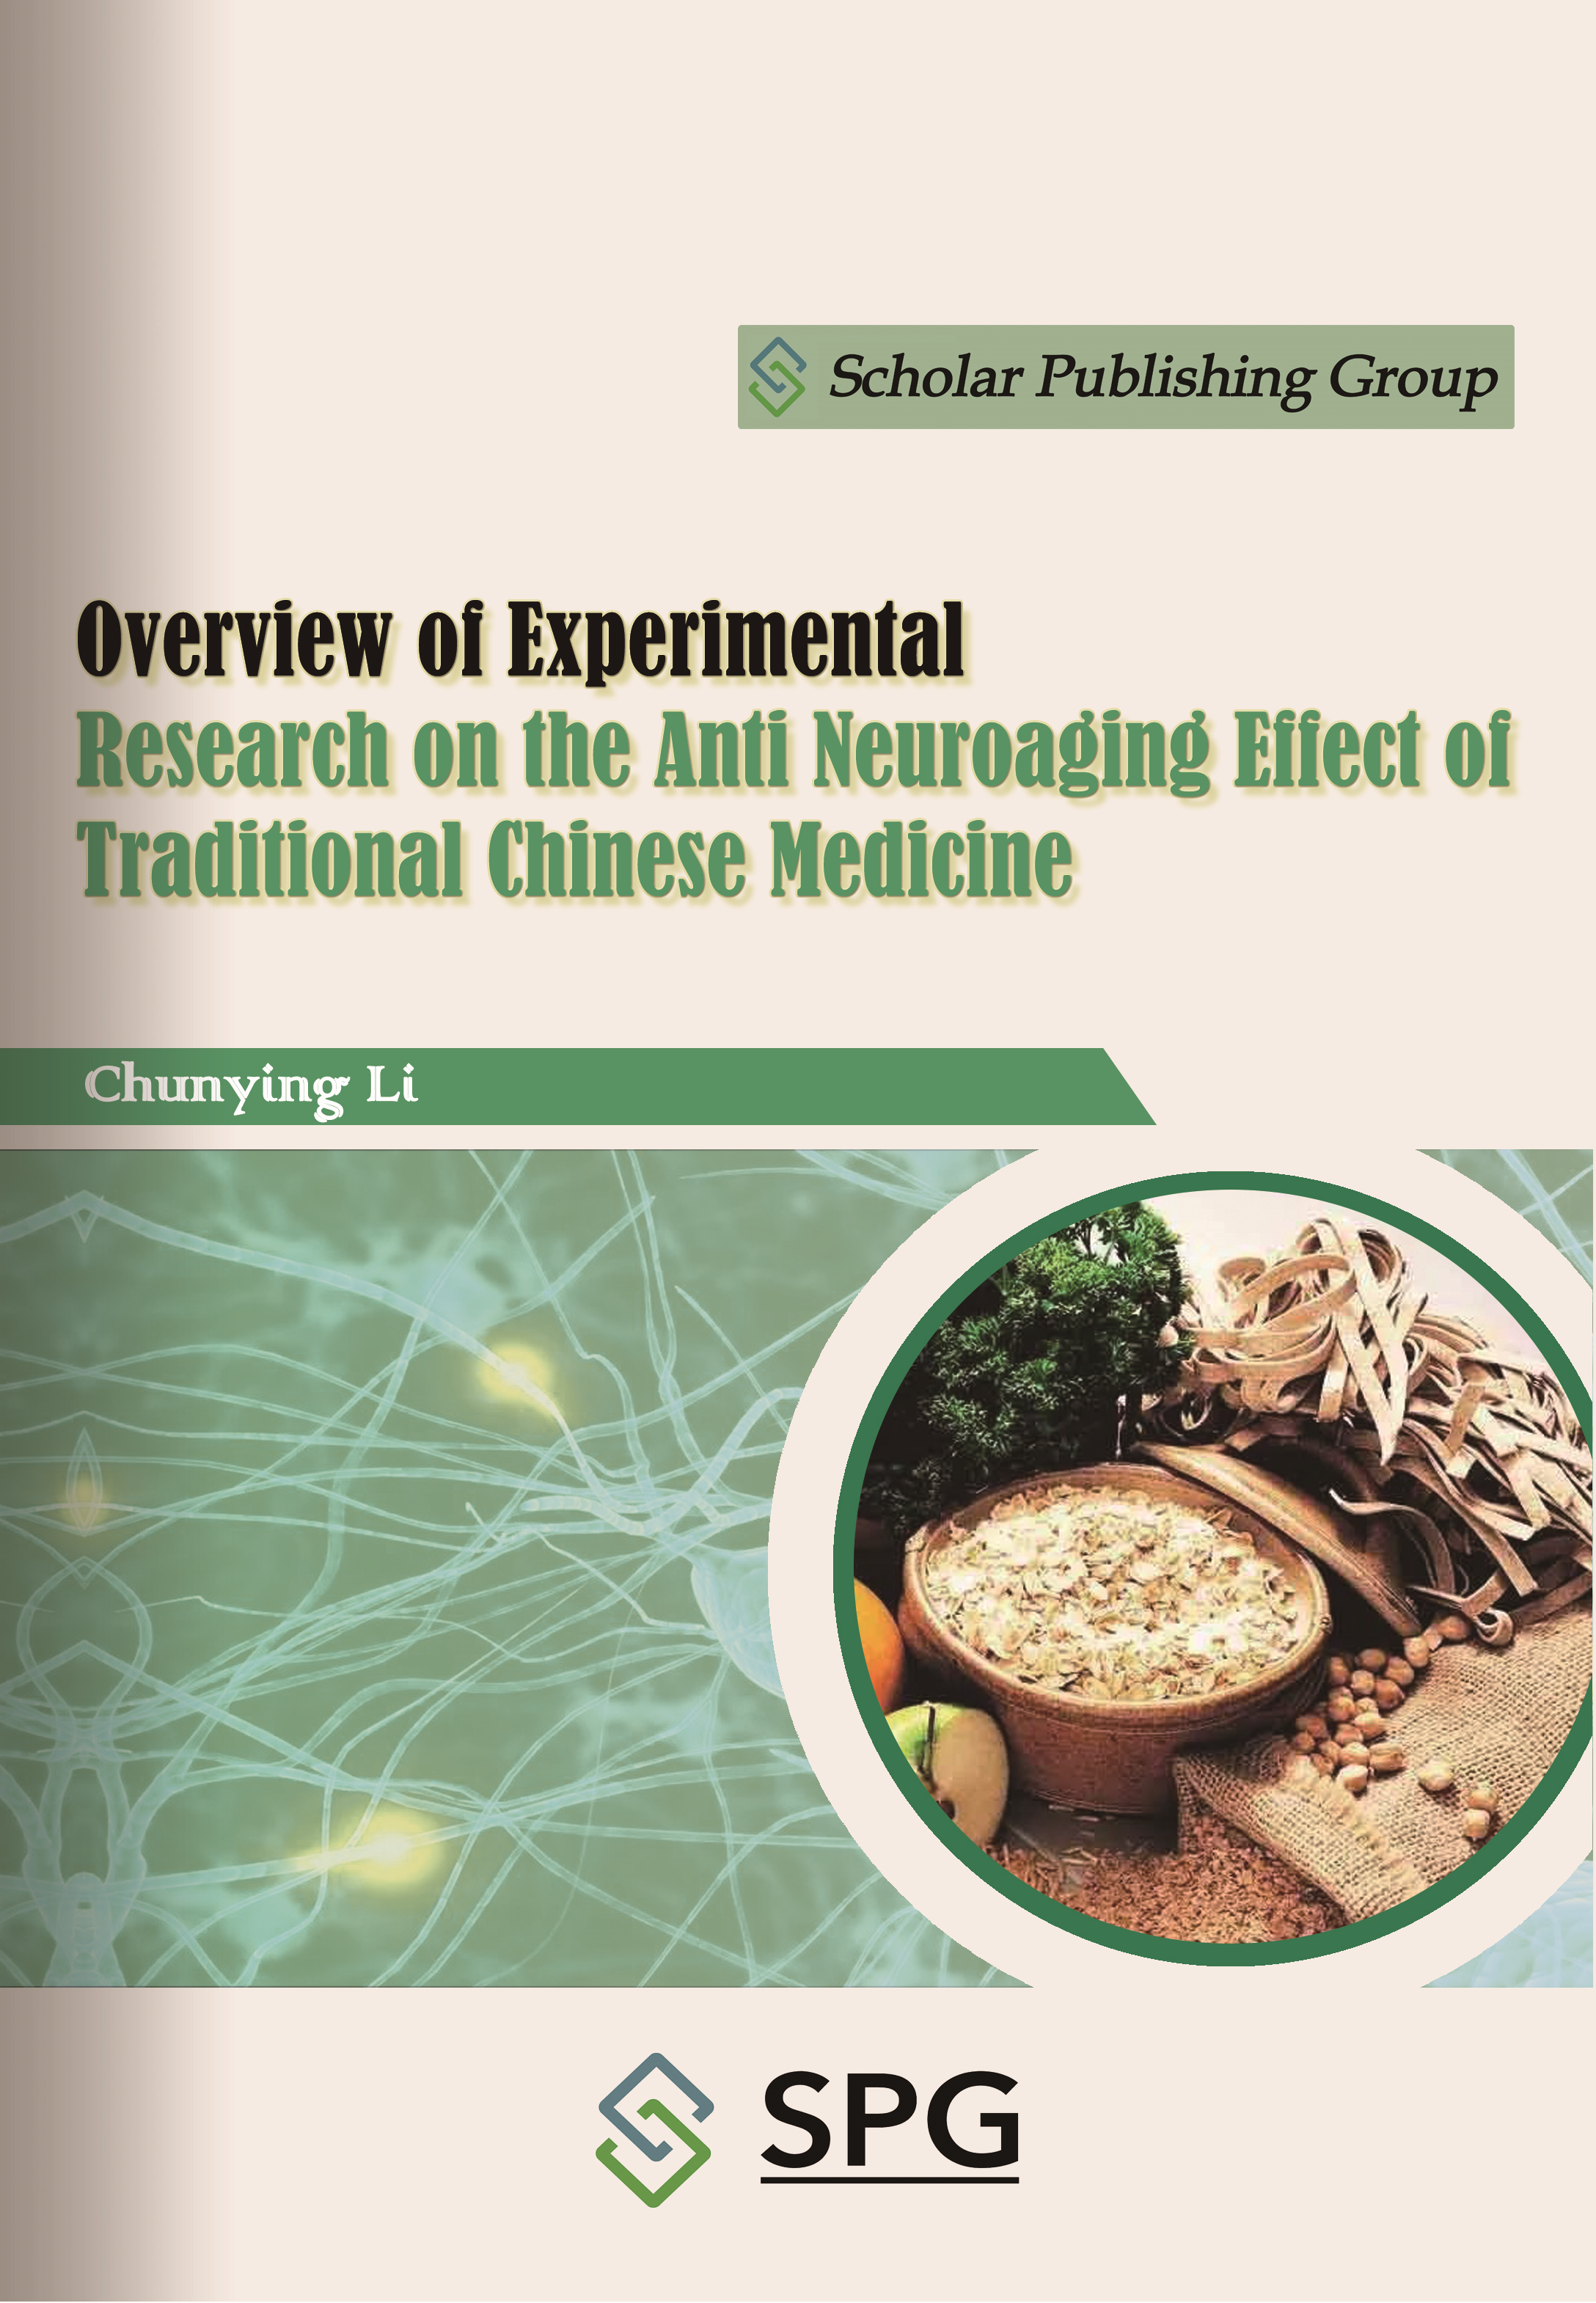 Overview of Experimental Research on the Anti Neuroaging Effect of Traditional Chinese Medicine | Scholar Publishing Group